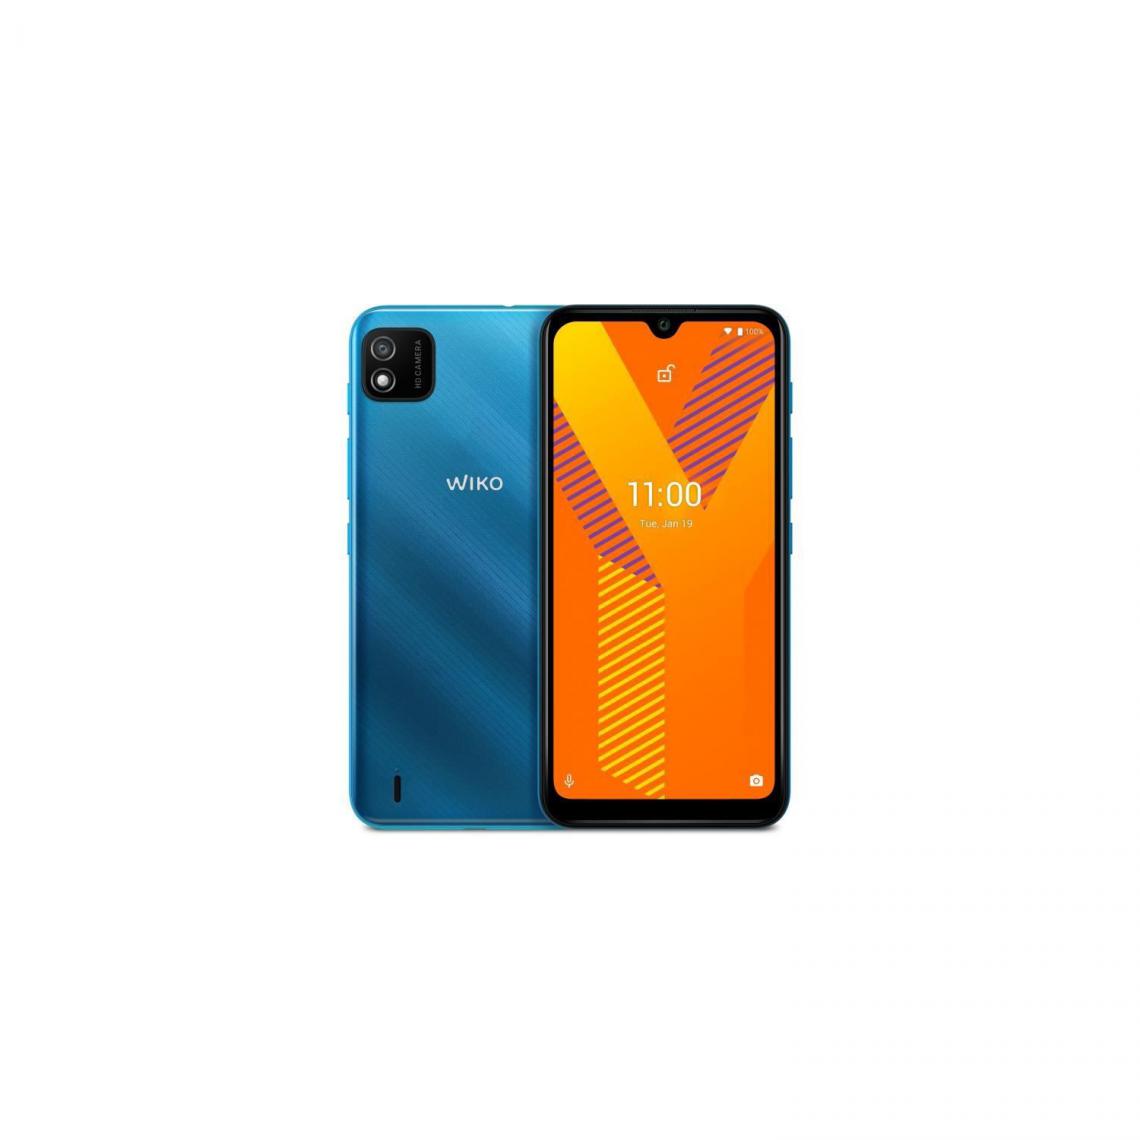 Wiko - WIKO Y62 LS Bleu clair - Smartphone Android